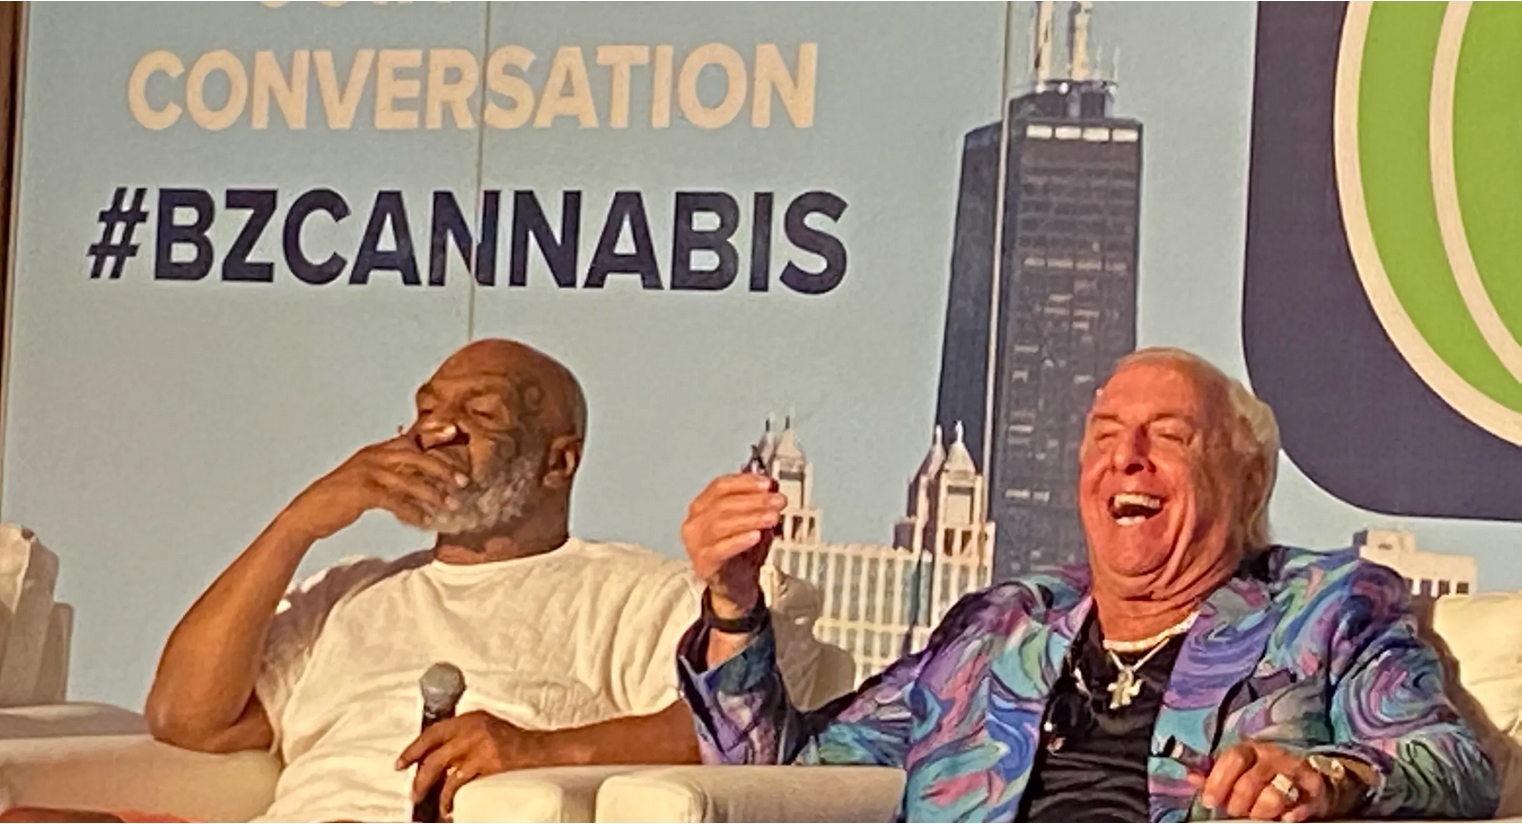 'I'll Be SMOKIN'! WOOOOO!' - Ric Flair And Mike Tyson Share A Blunt In The Middle Of A Business Conference